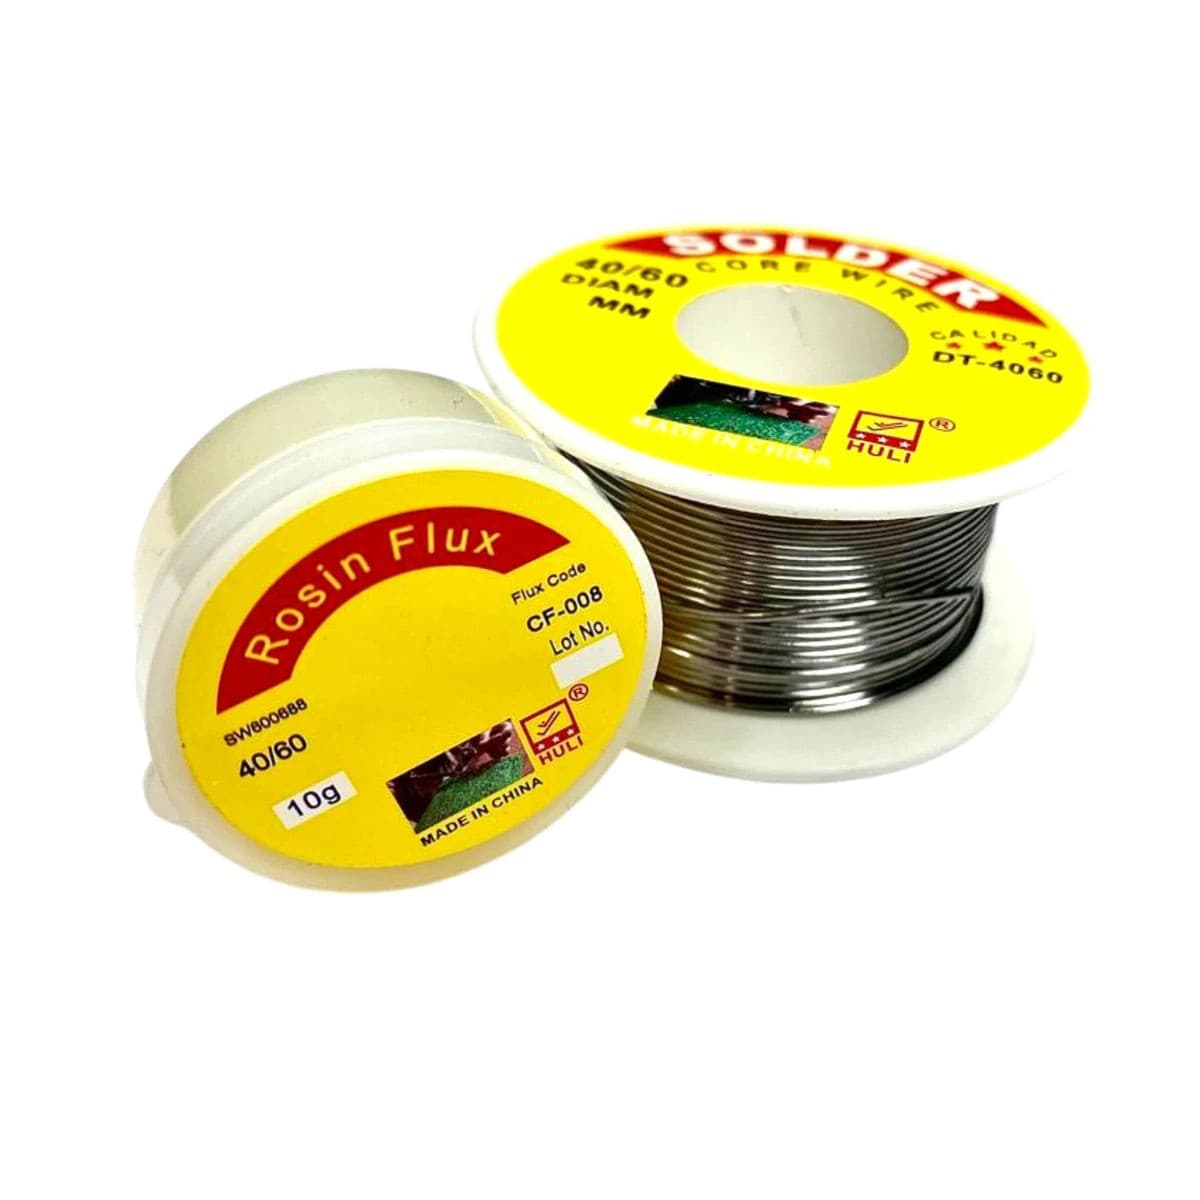 Flux Solder wire kit - South East Clearance Centre